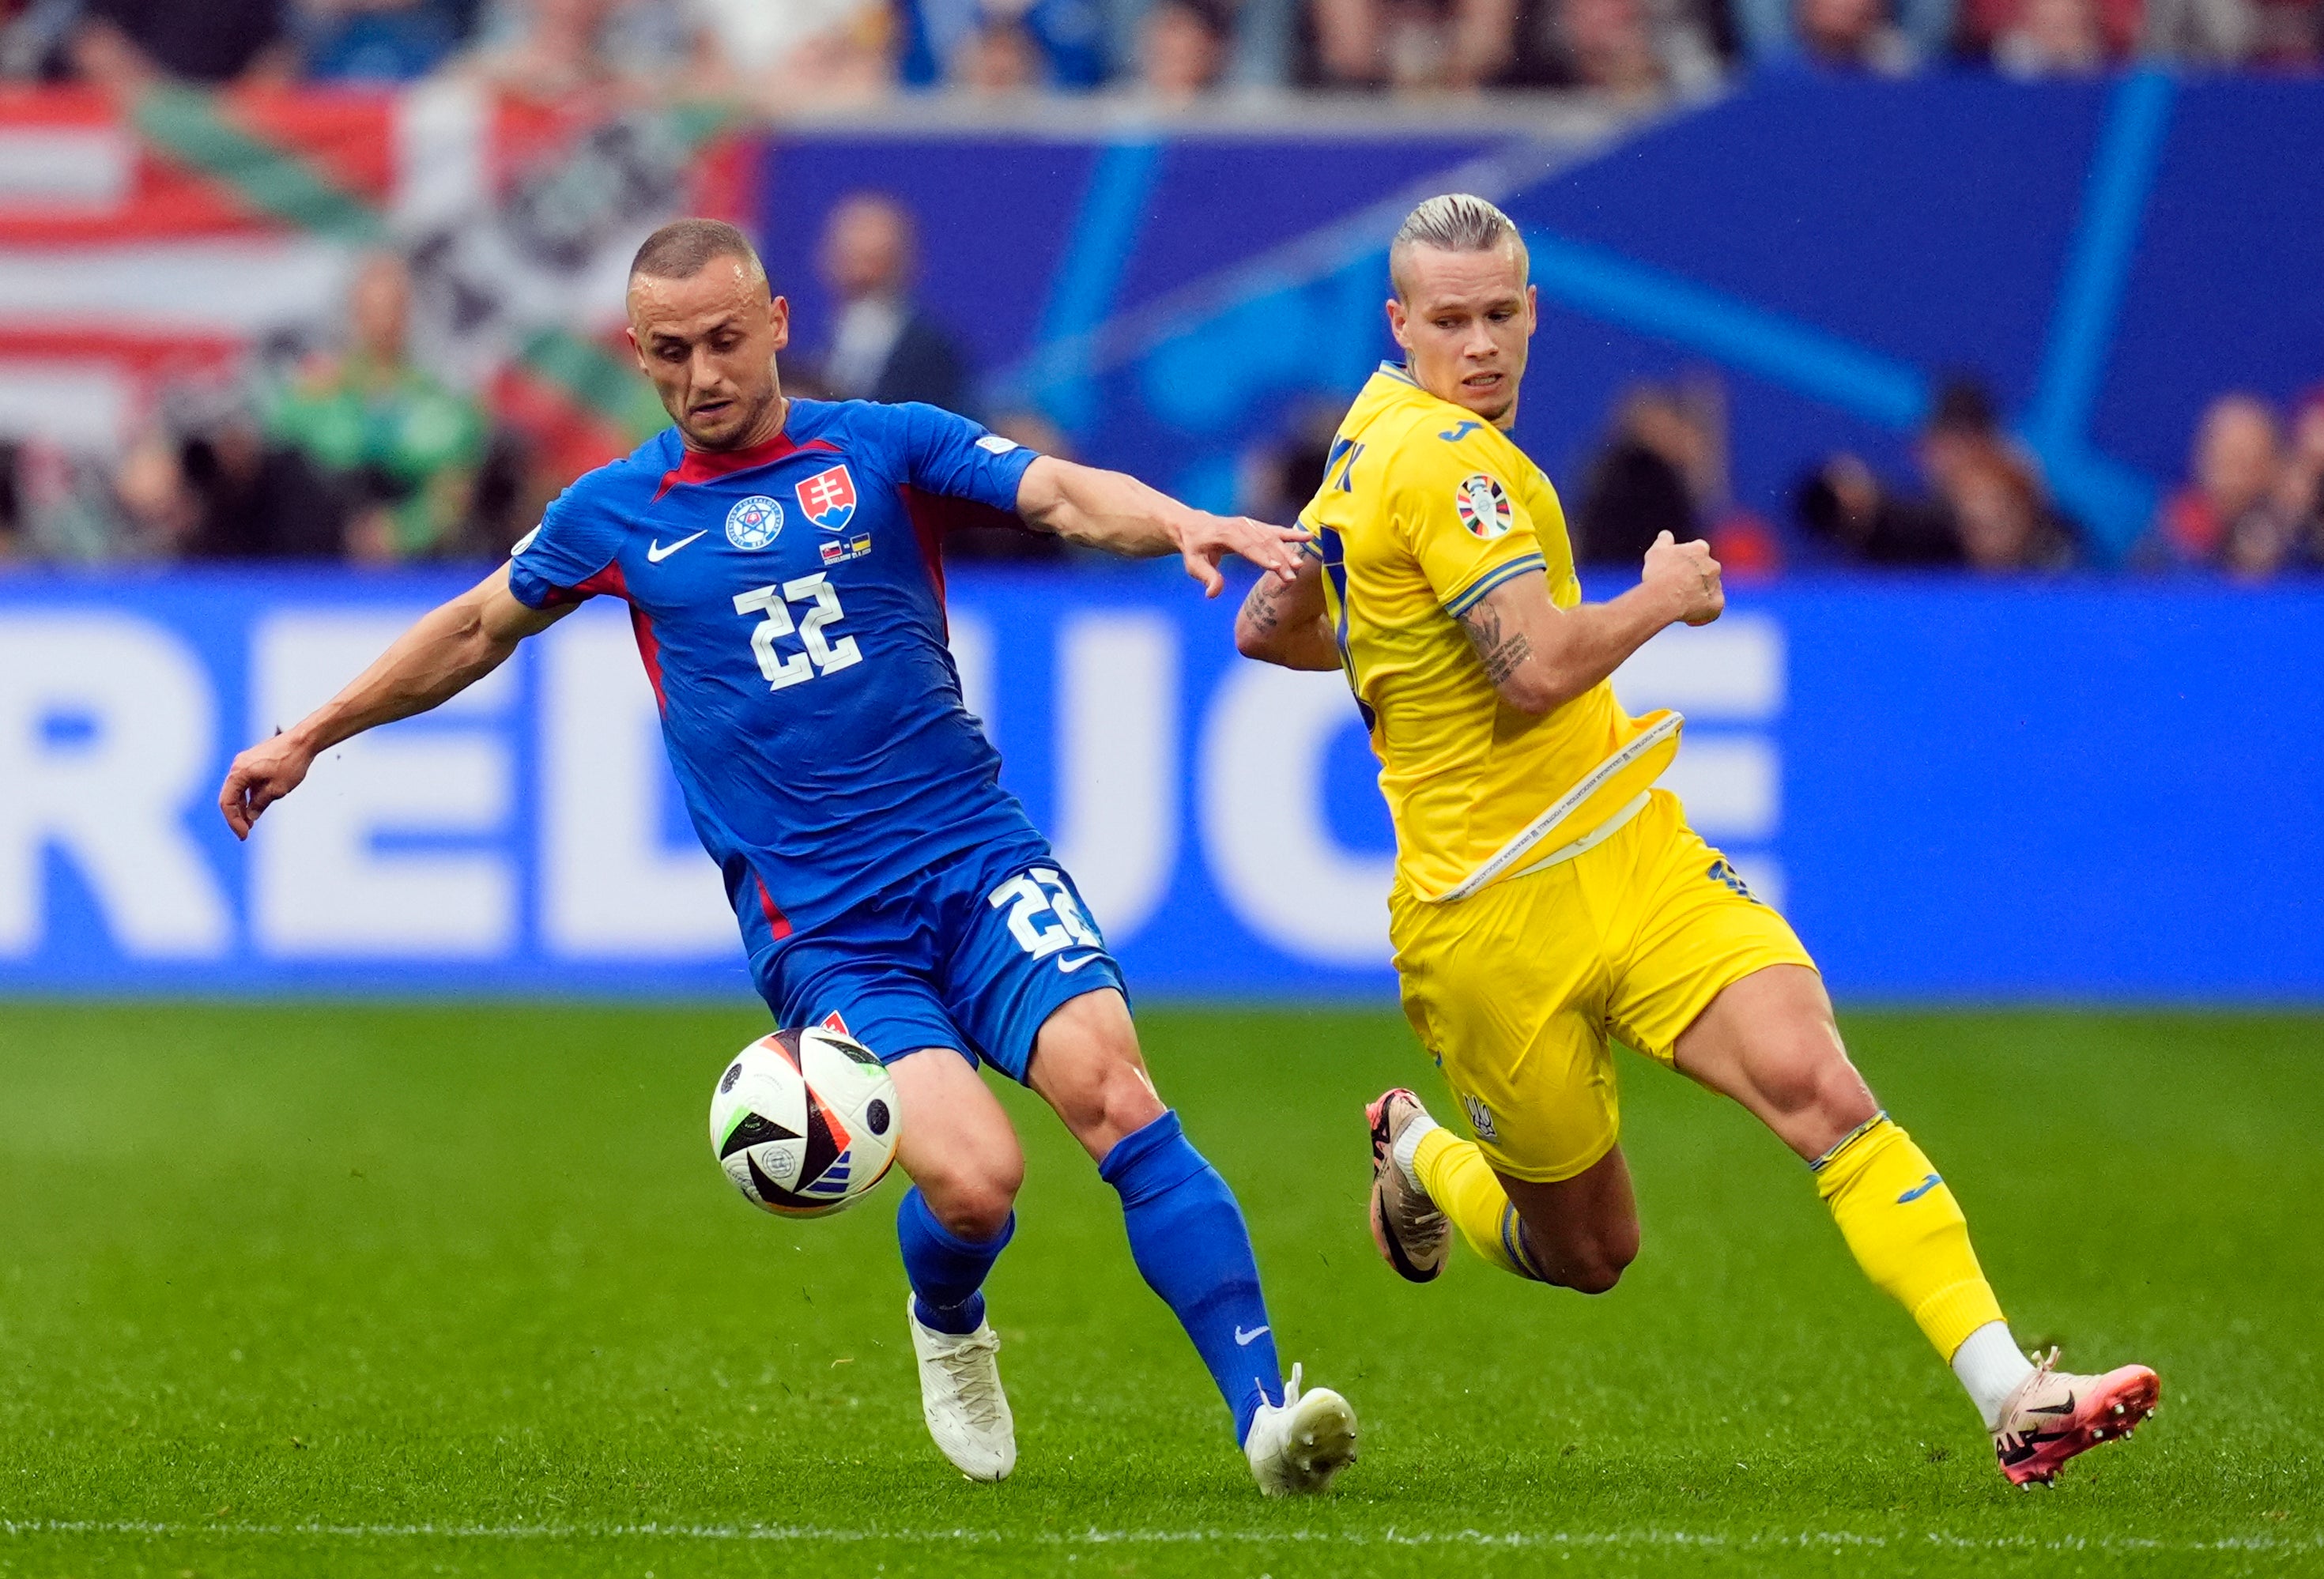 Midfielder Stanislav Lobotka has benefitted from Slovakia’s more intense playing style